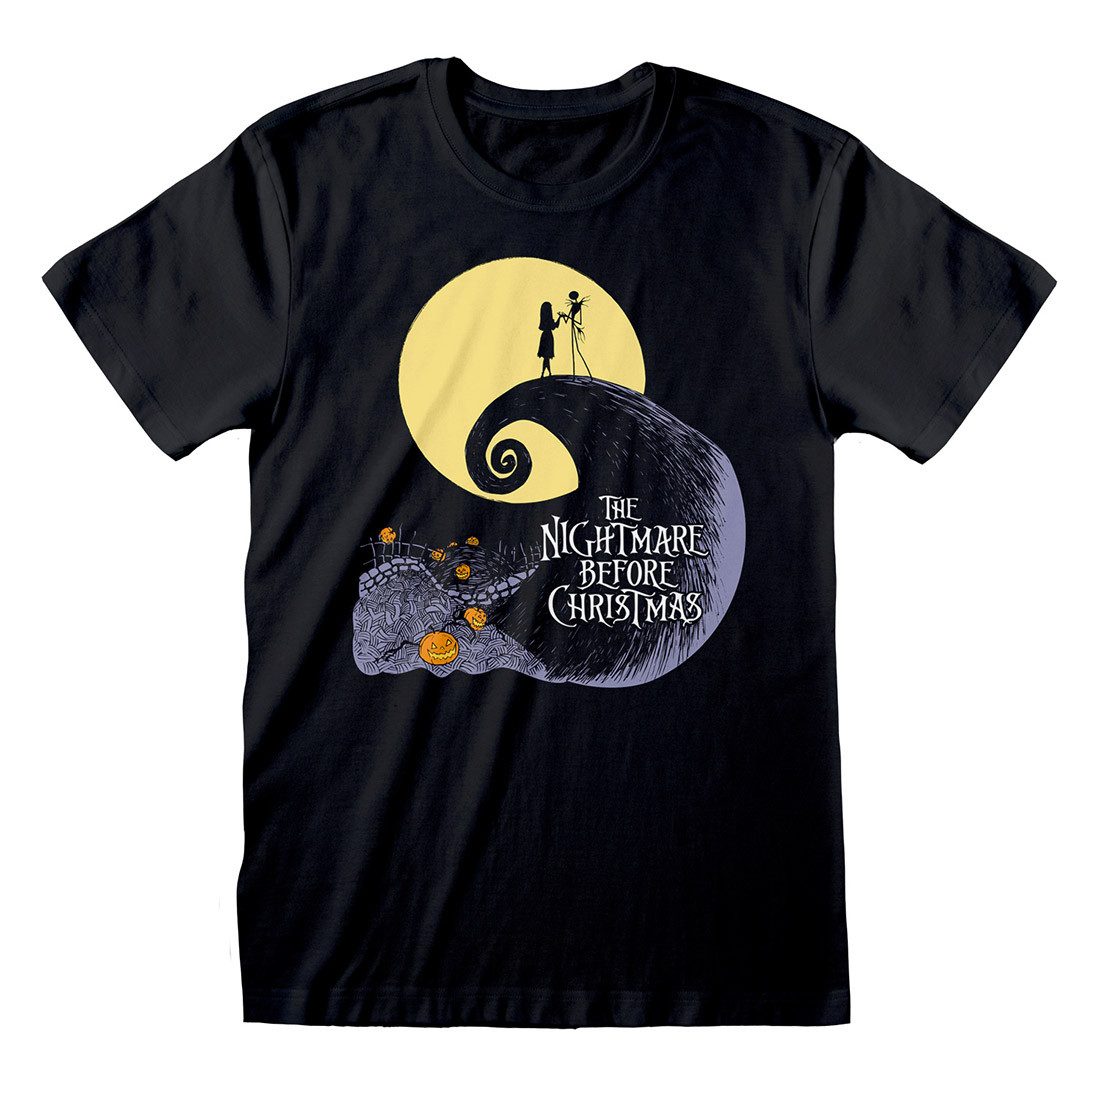 The Nightmare Before Christmas T-Shirt Silhouette